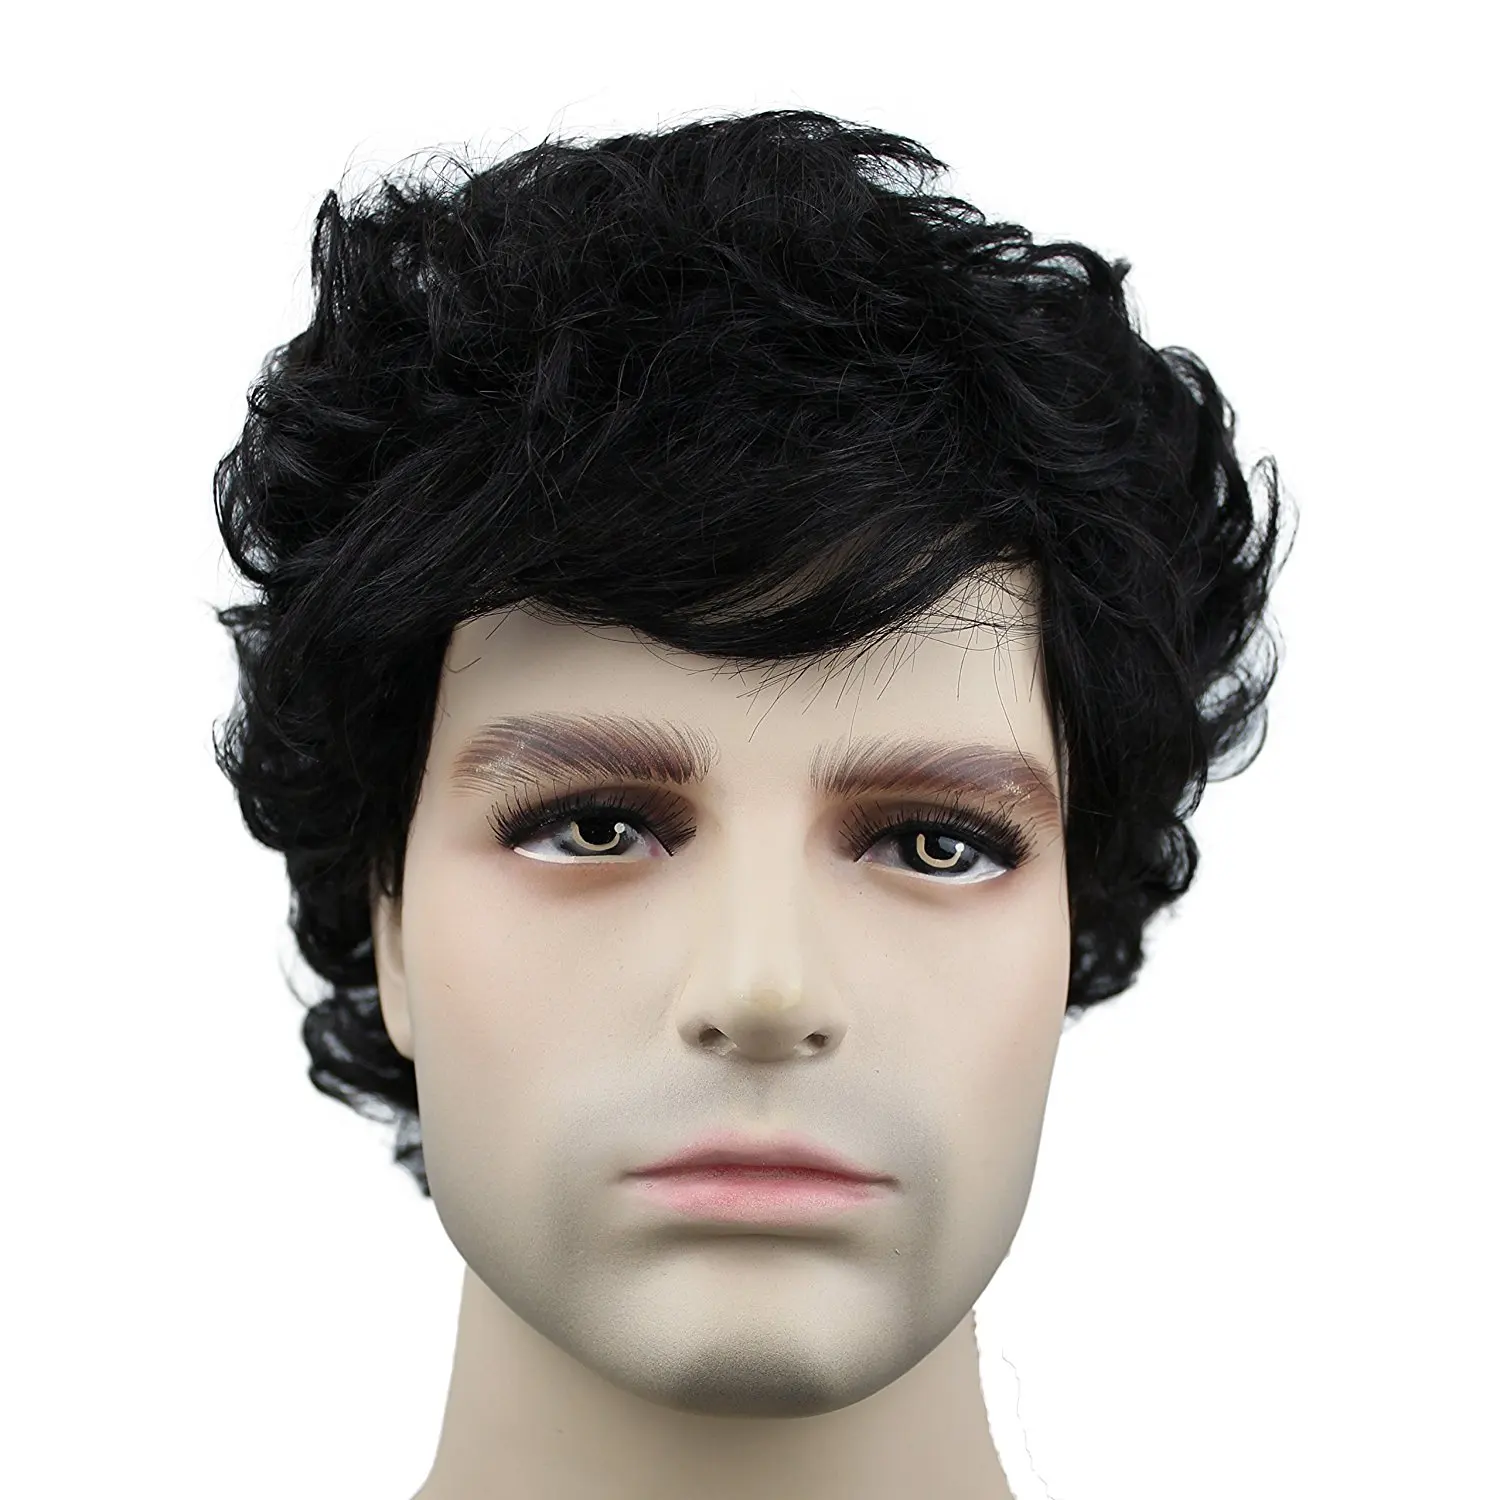 Cheap Mens Full Wigs Find Mens Full Wigs Deals On Line At | Free Hot ...